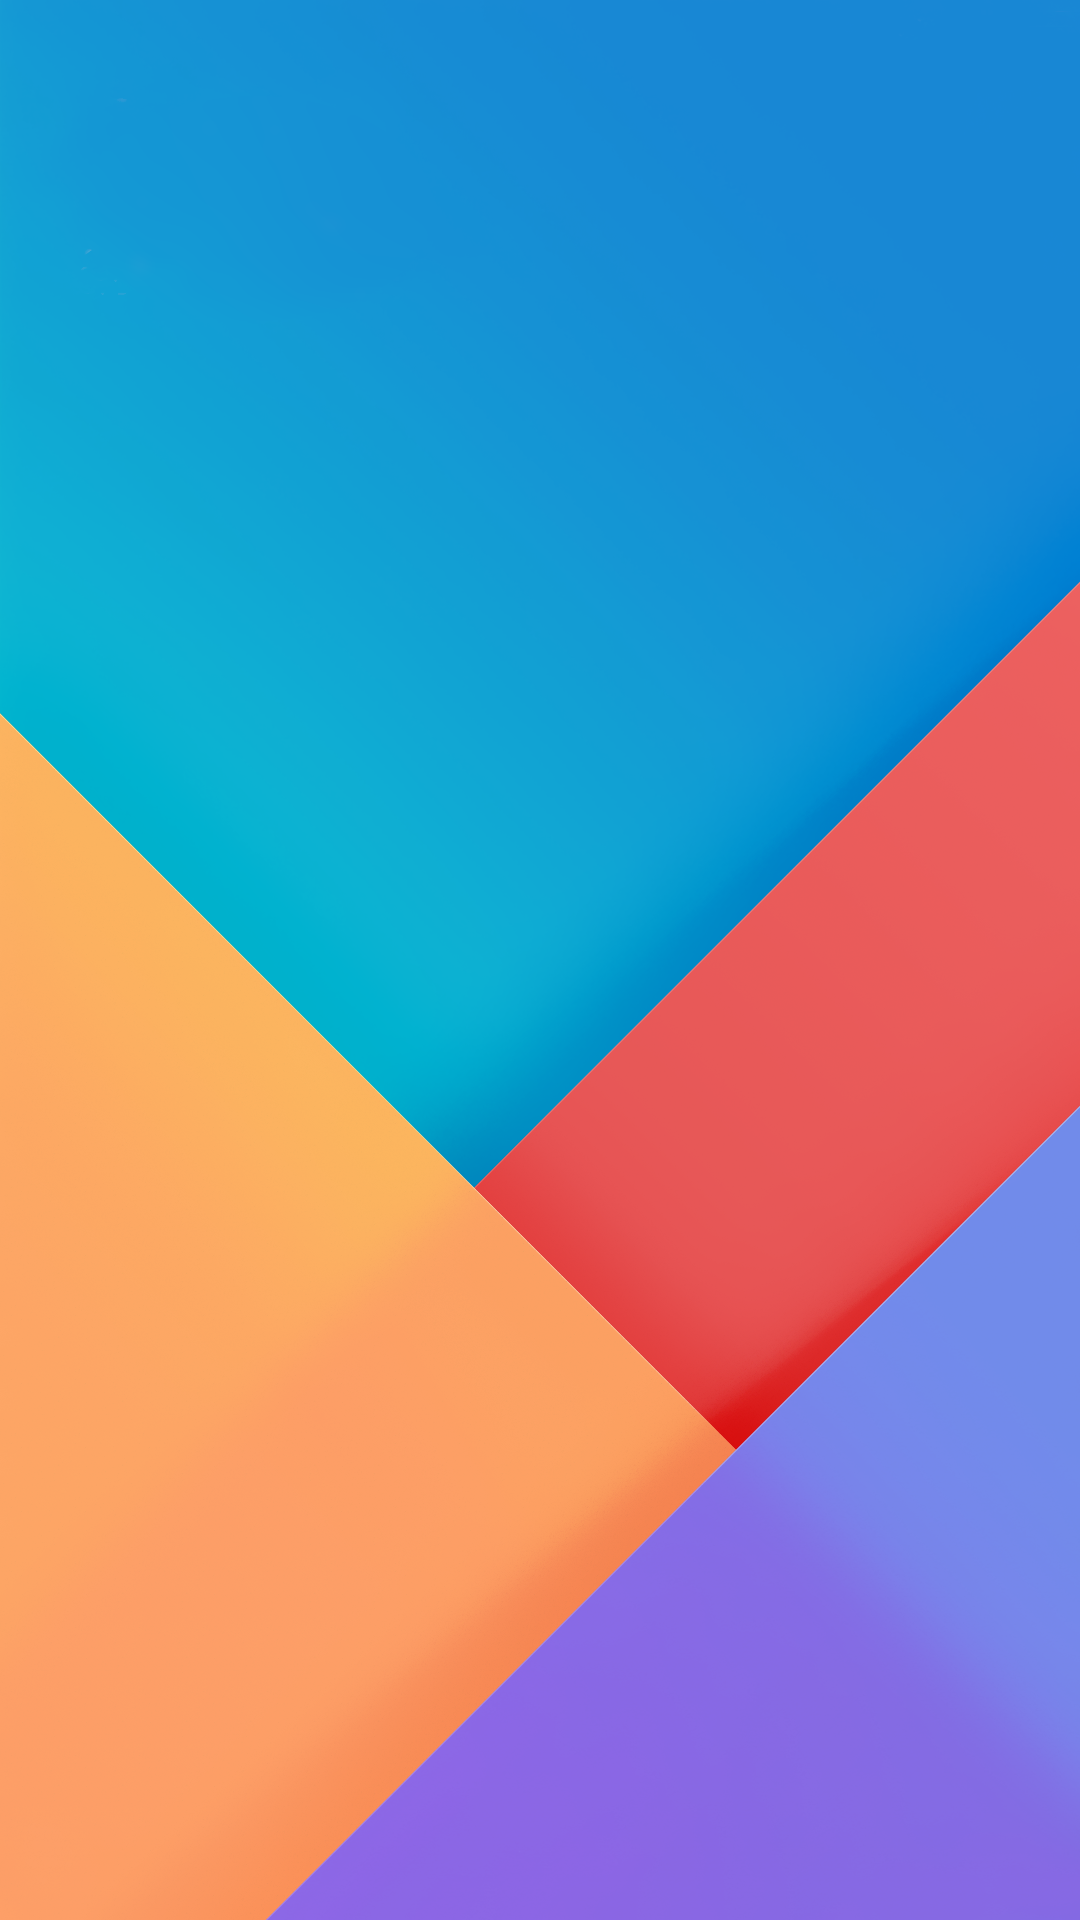 Download MIUI 9 Stock Wallpapers - Android Tutorial